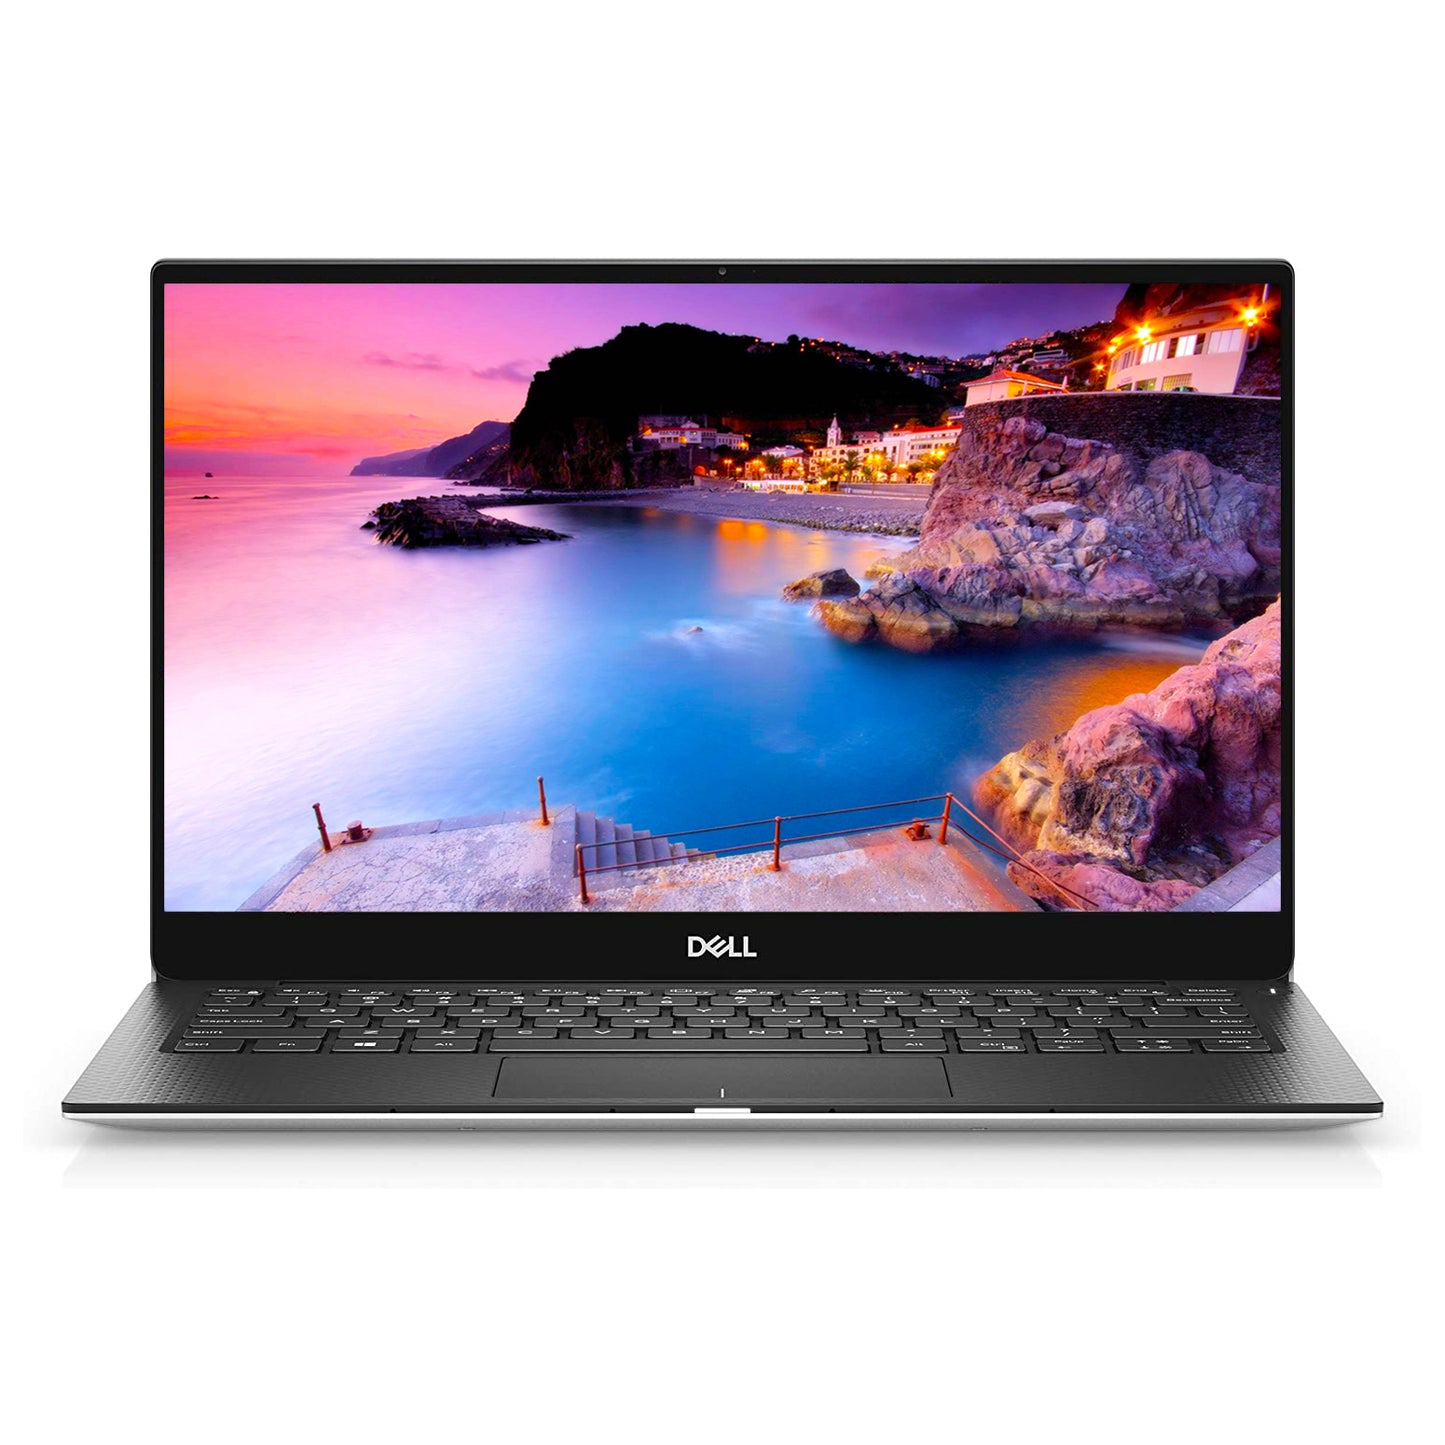 Dell XPS 13 7390 10th Gen Cpu 13.3" Screen Laptop Offers (New OB)